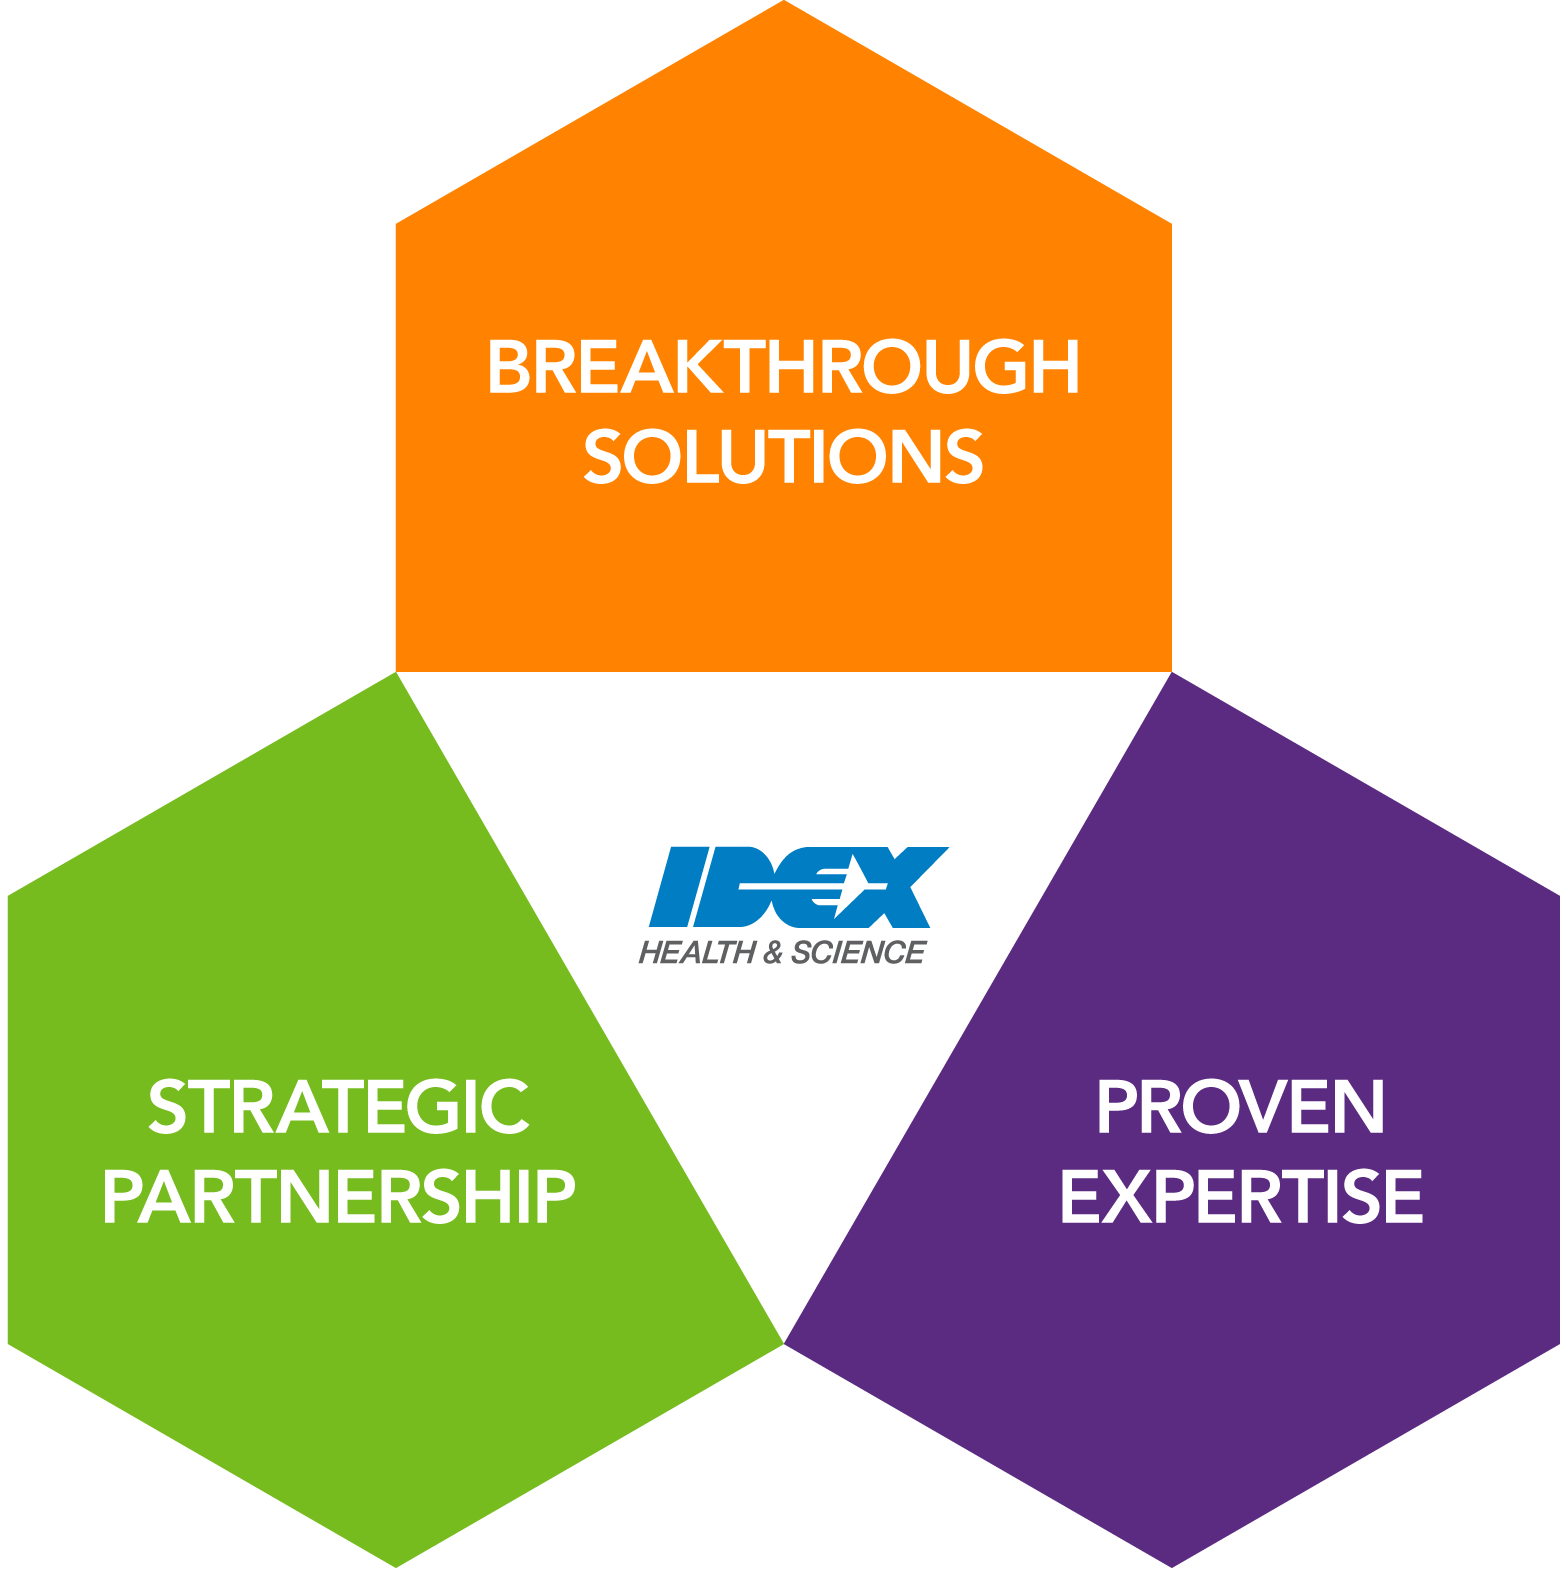 breakthrough solutions, strategic partnership, and proven expertise